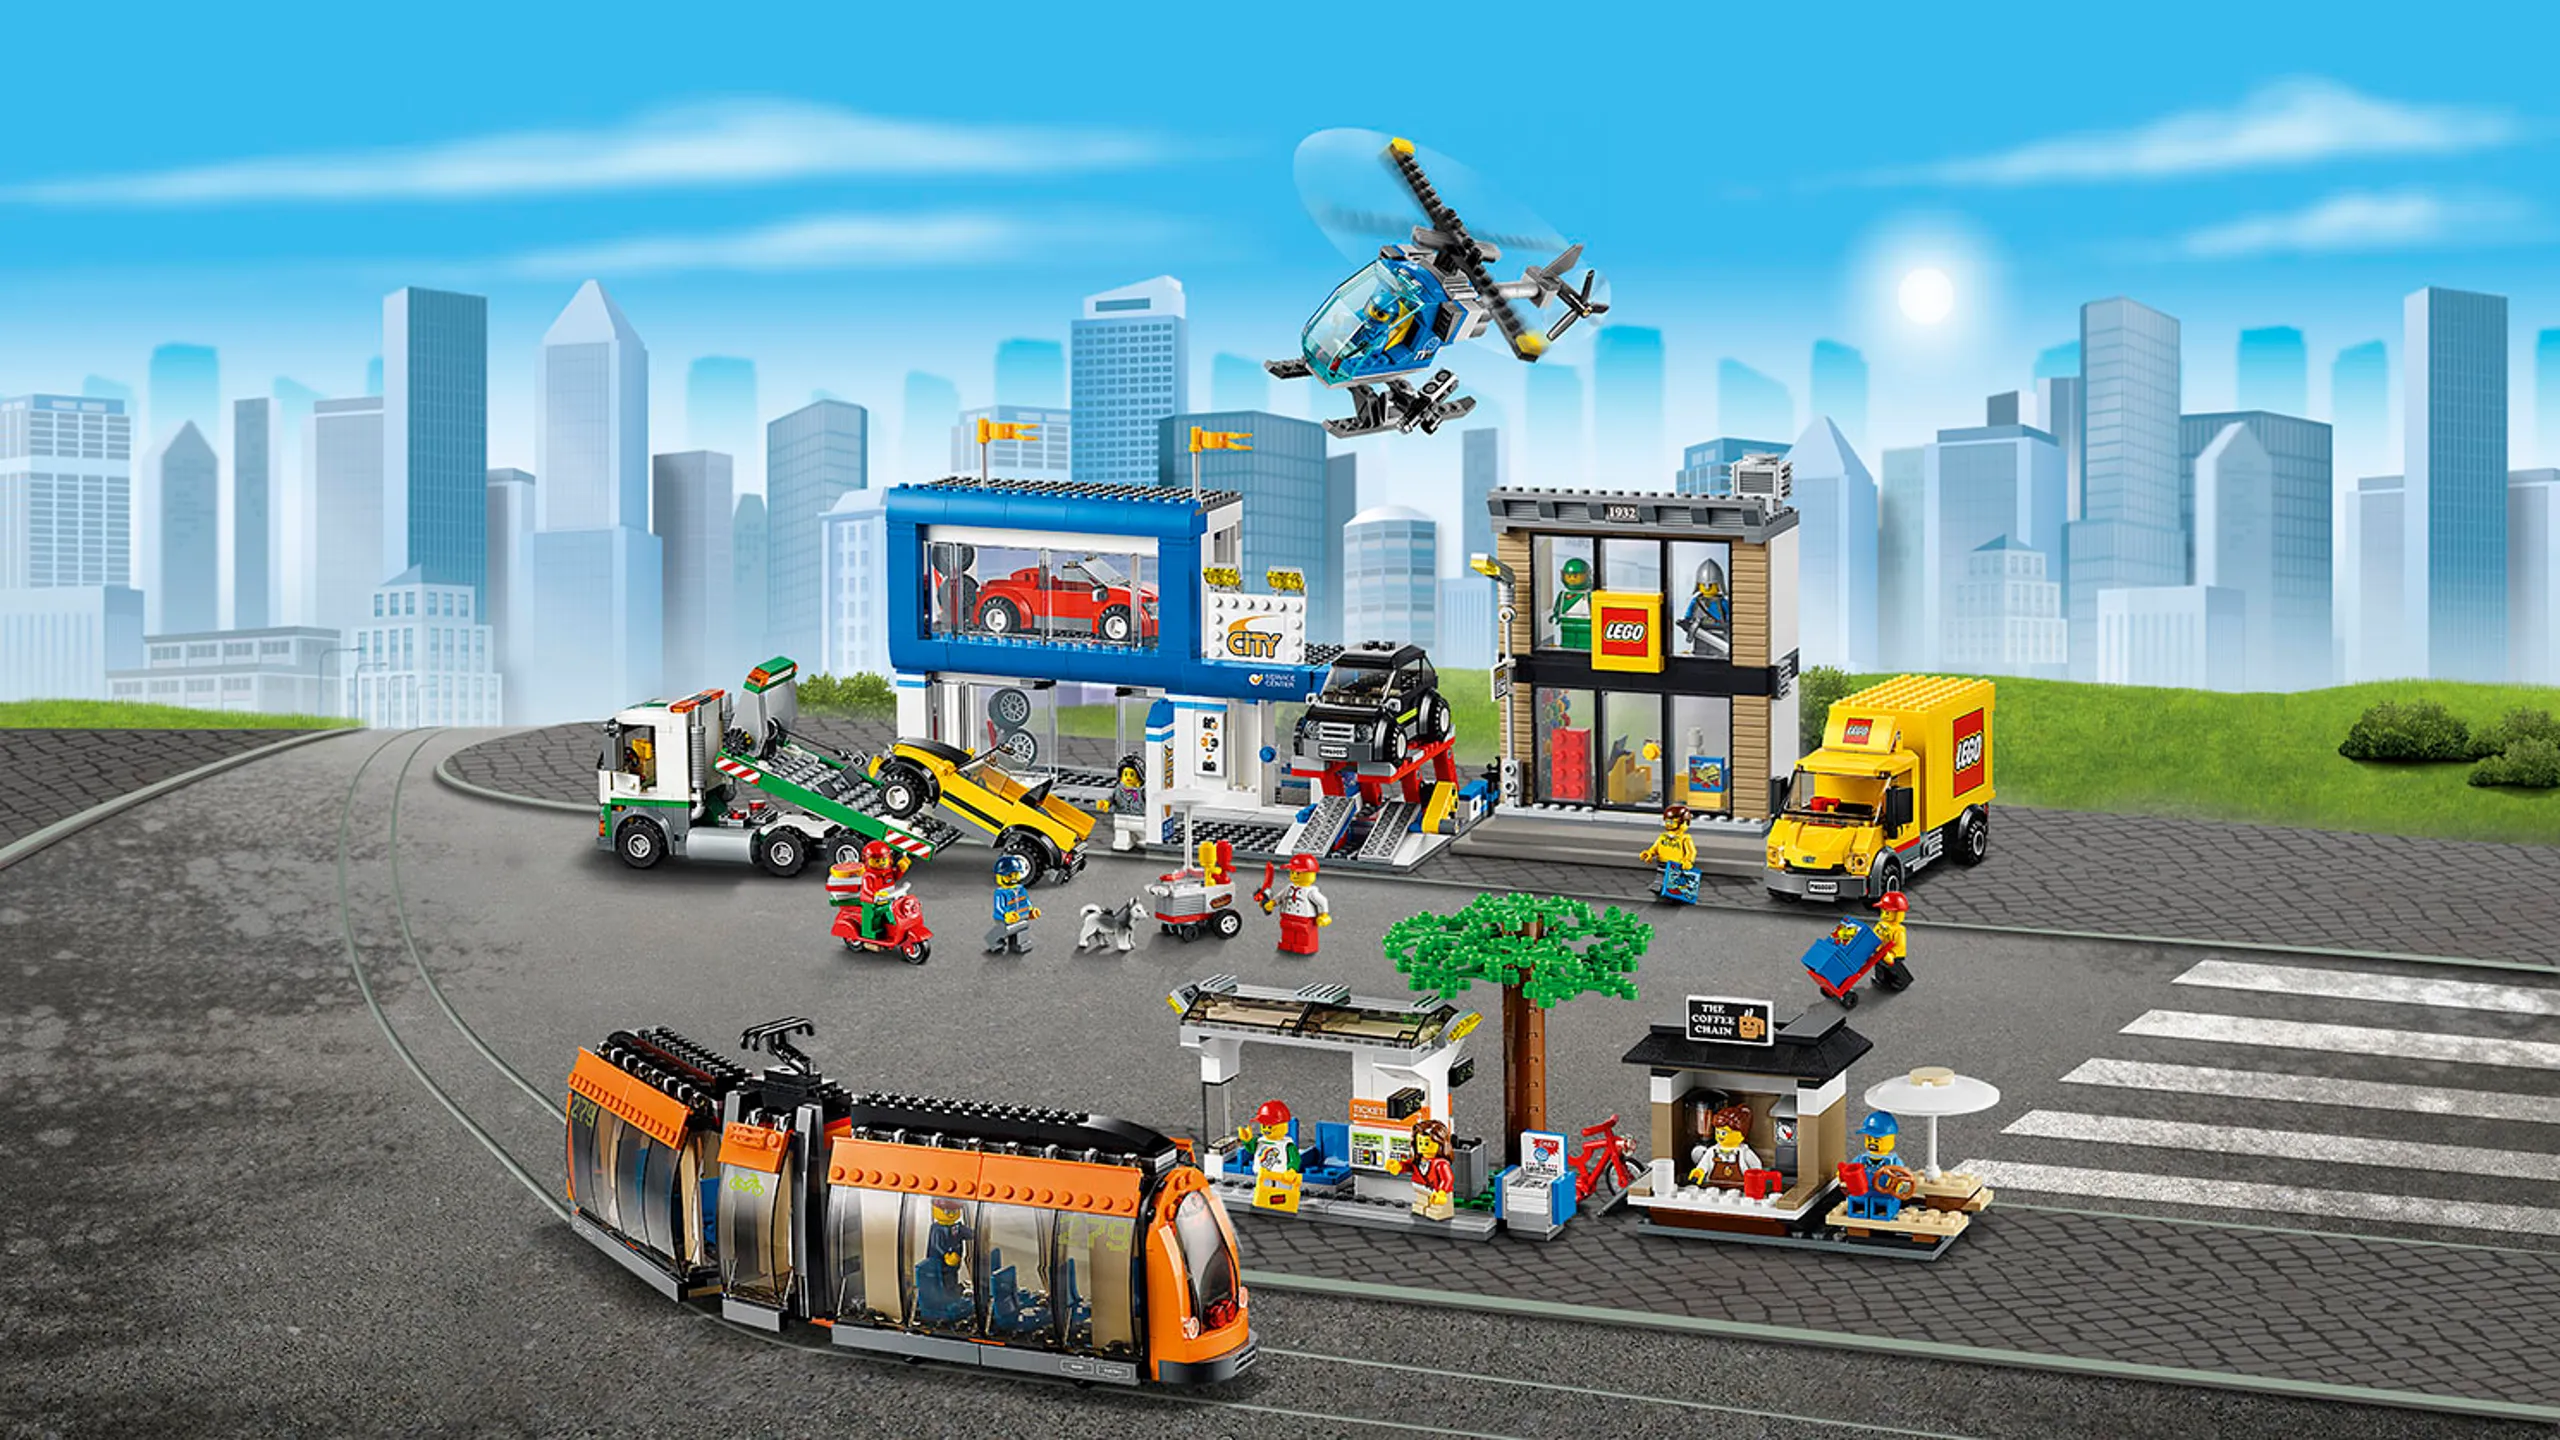 LEGO City Town shops, cars, trains and minifigures - City Square 60097